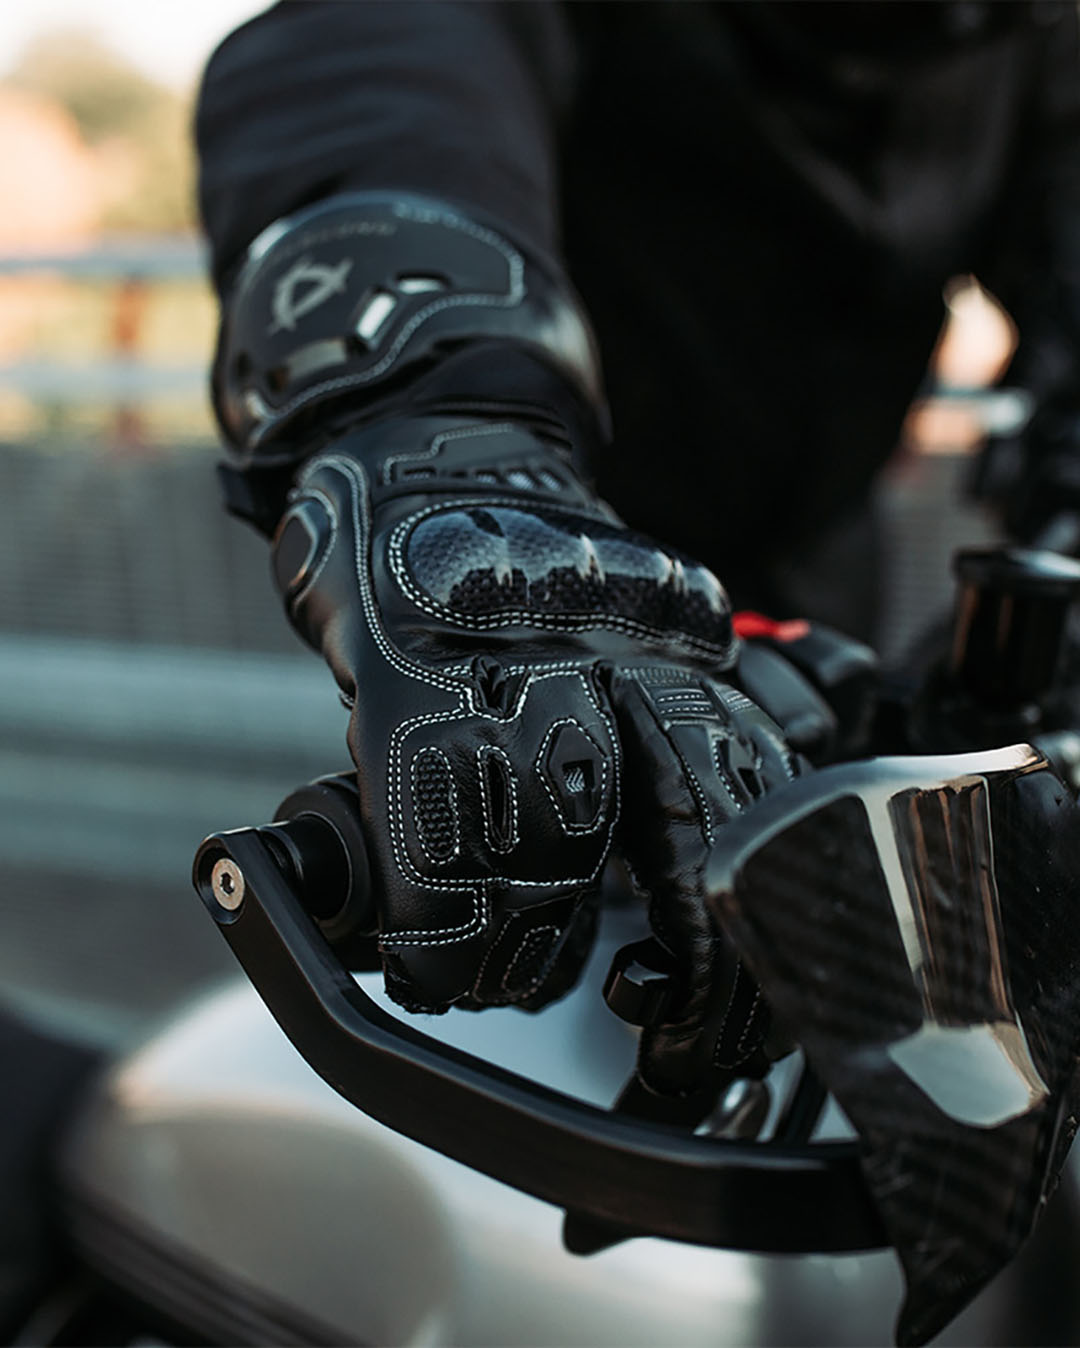 Buy Riding Glove Online in India, Riding Gears